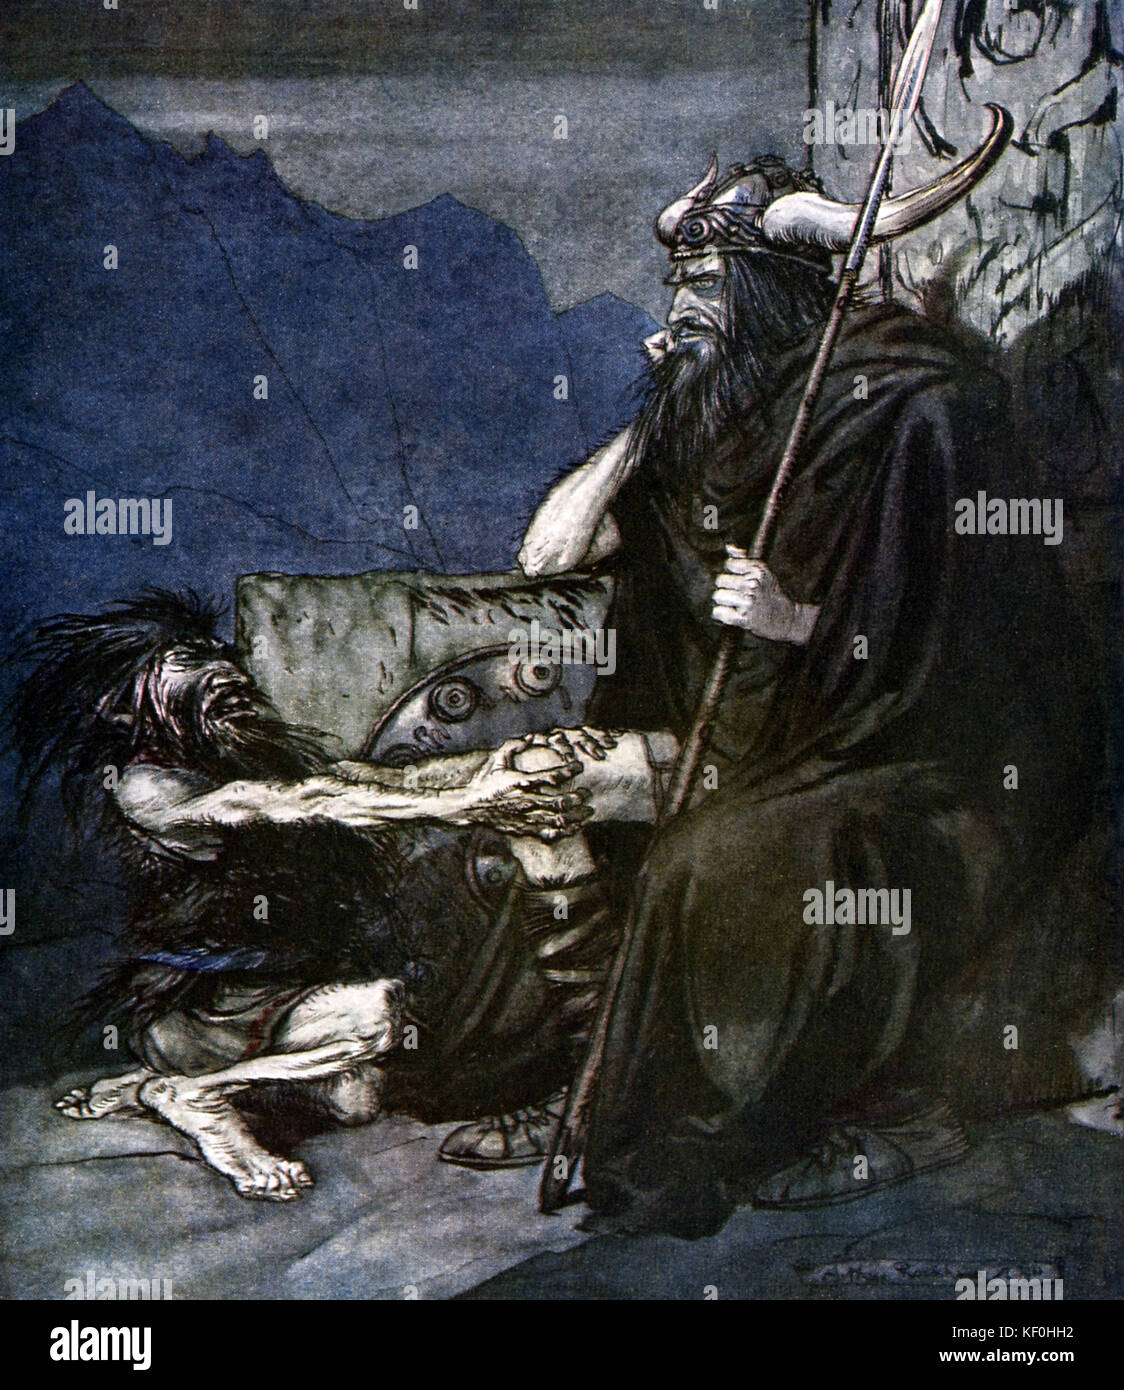 The Twilight of the Gods / Götterdämmerung by Richard Wagner.  Alberich, king of the race of Nibelungen, begs his son Hagen to avenge his slight by Wotan, king of the West Germanic pantheon of gods, and the Wälsung, Wotan 's children. Illustration by Arthur Rackham 1867 - 1939. Caption: 'Swear to me, Hagen, my son!' Act 2. 'Schwörst du mir's, Hagen, mein Sohn?' From 'The Ring Cycle' / 'Der Ring des Nibelungen'. RW German composer & author, 22 May 1813 - 13 February 1883. Stock Photo